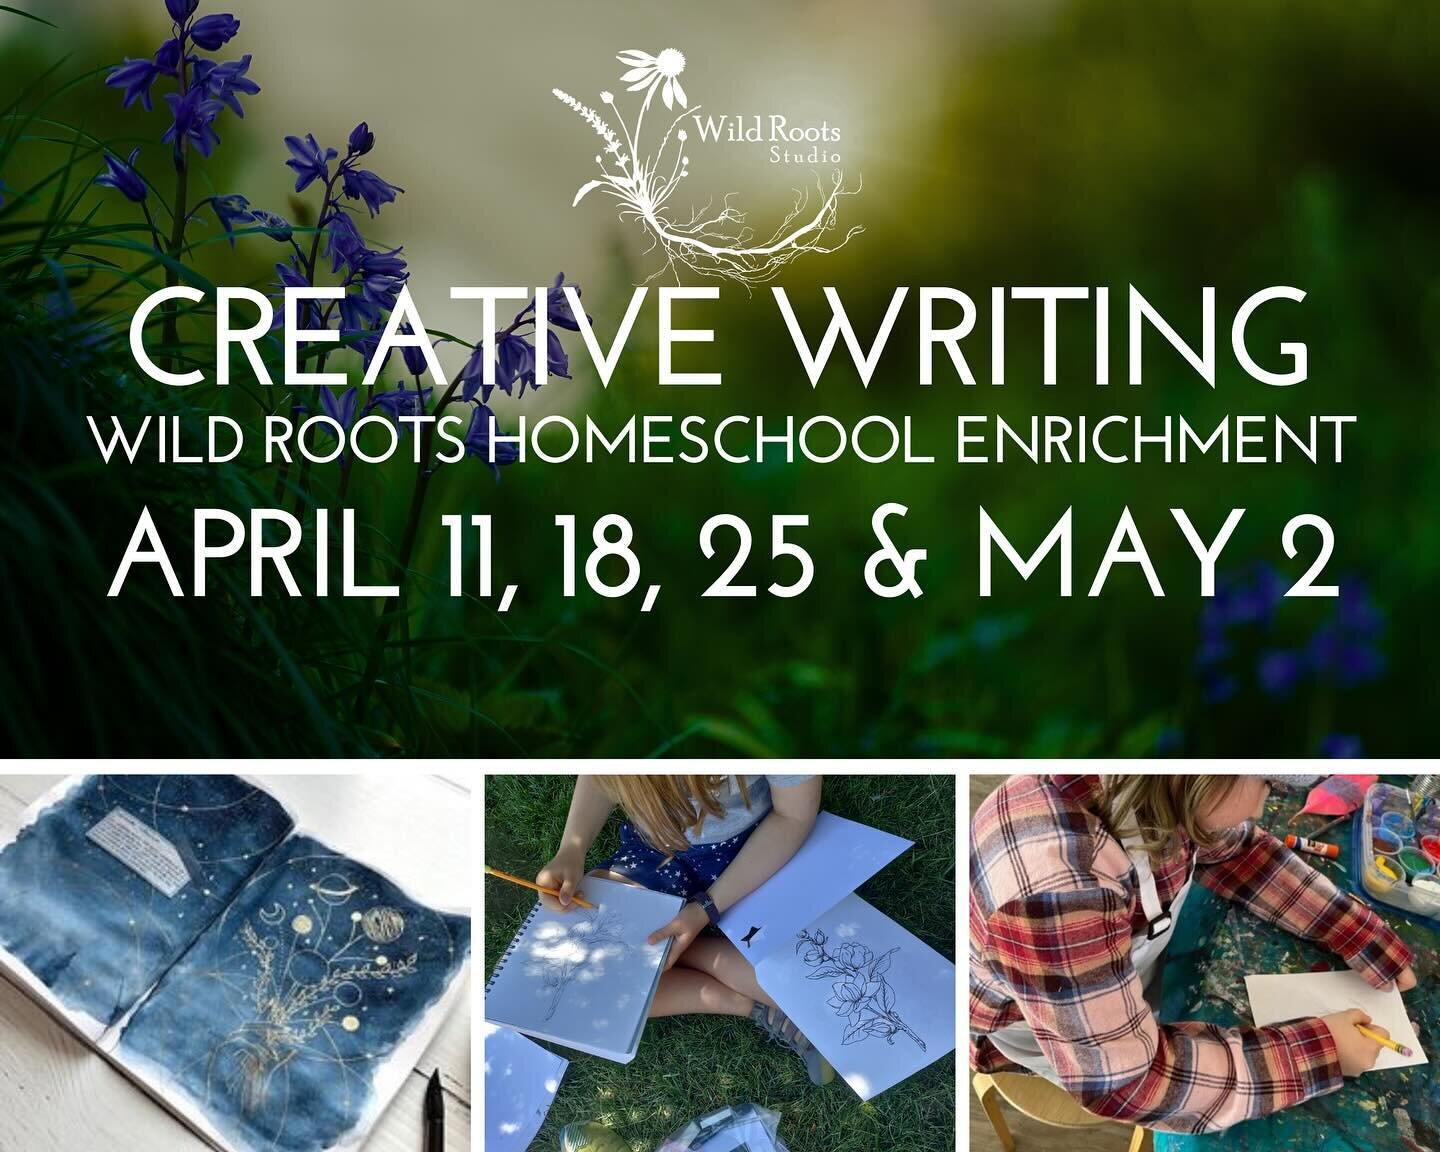 HEY HOMESCHOOL FAMILIES! 

We are so excited to offer our next home school session. This one is a super special Creative Writing workshop series!!!

CREATIVE WRITING FOR HOMESCHOOLERS - April 11, 18, 25 &amp; May 2

Unleash the power of words and ima